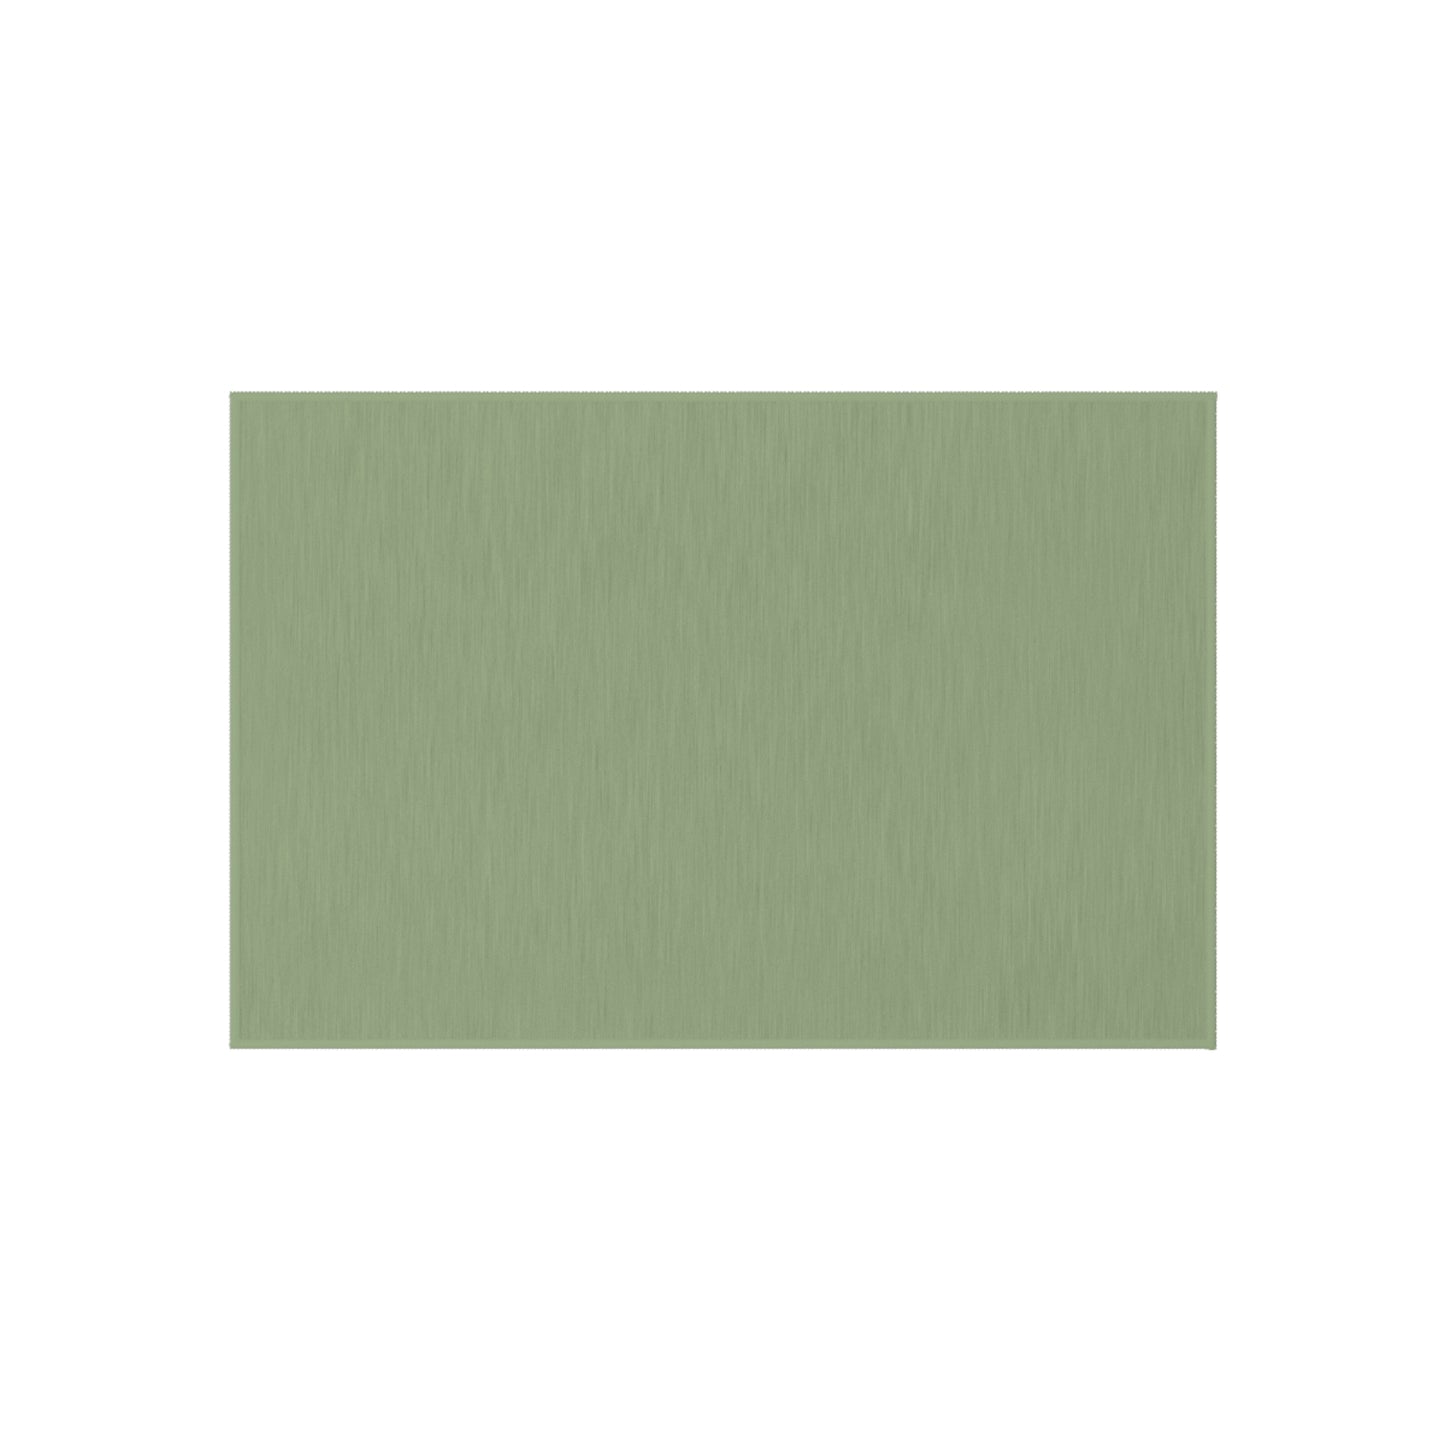 Sage Green Outdoor Area Rug, Light Olive Waterproof Carpet Home Floor Decor Large 2x3 4x6 3x5 5x7 9x10 Patio Small Large Camping Mat